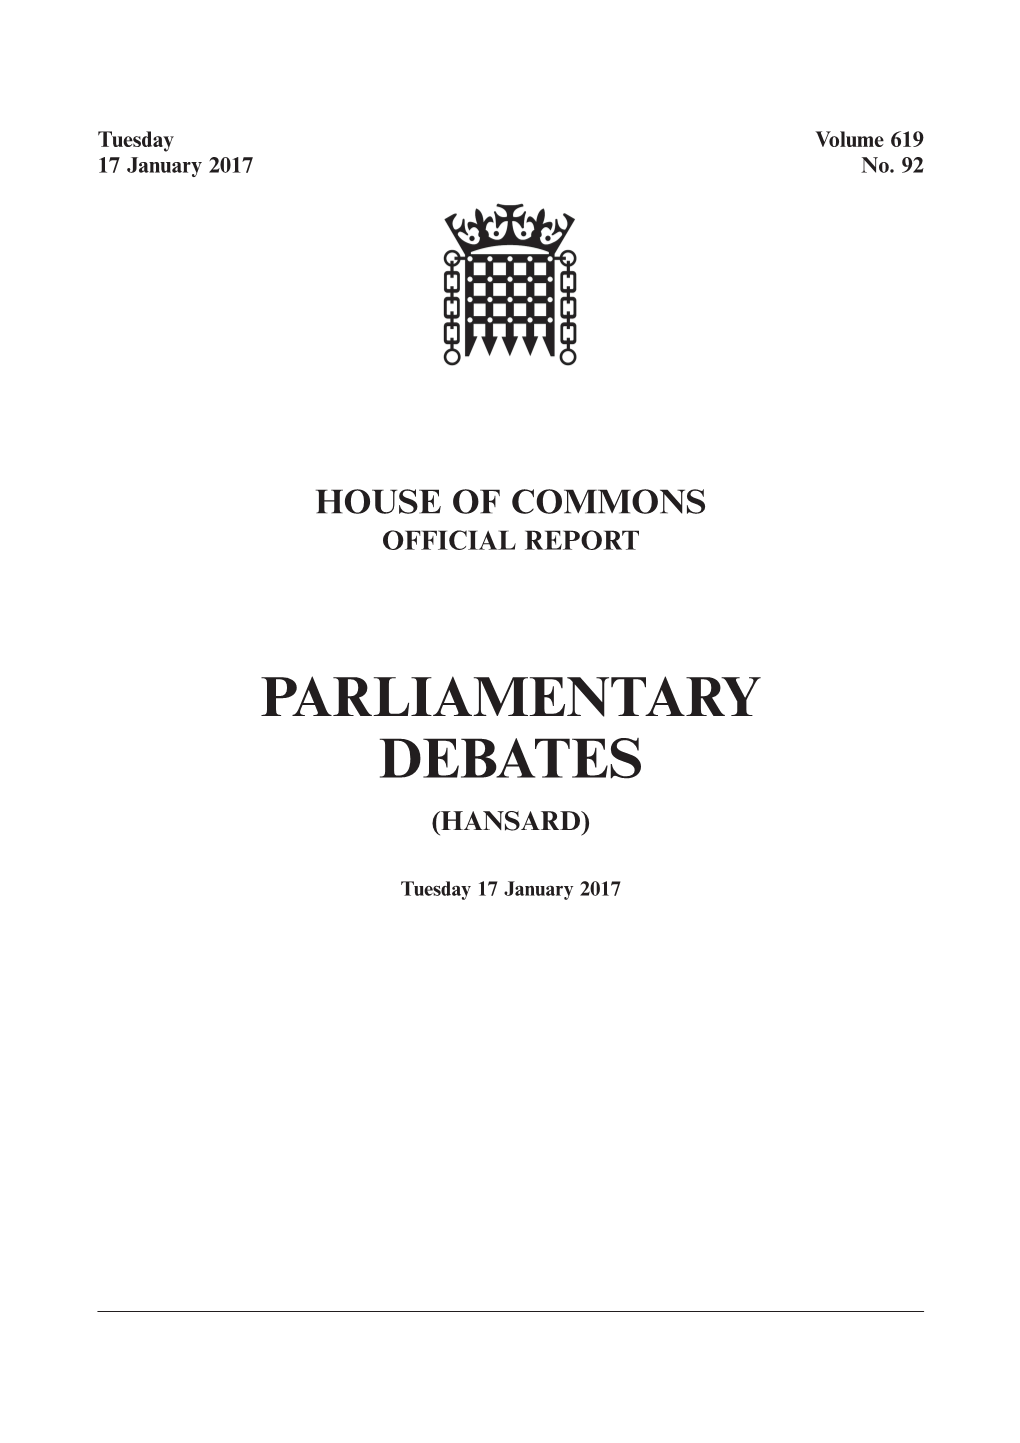 Whole Day Download the Hansard Record of the Entire Day in PDF Format. PDF File, 1.25